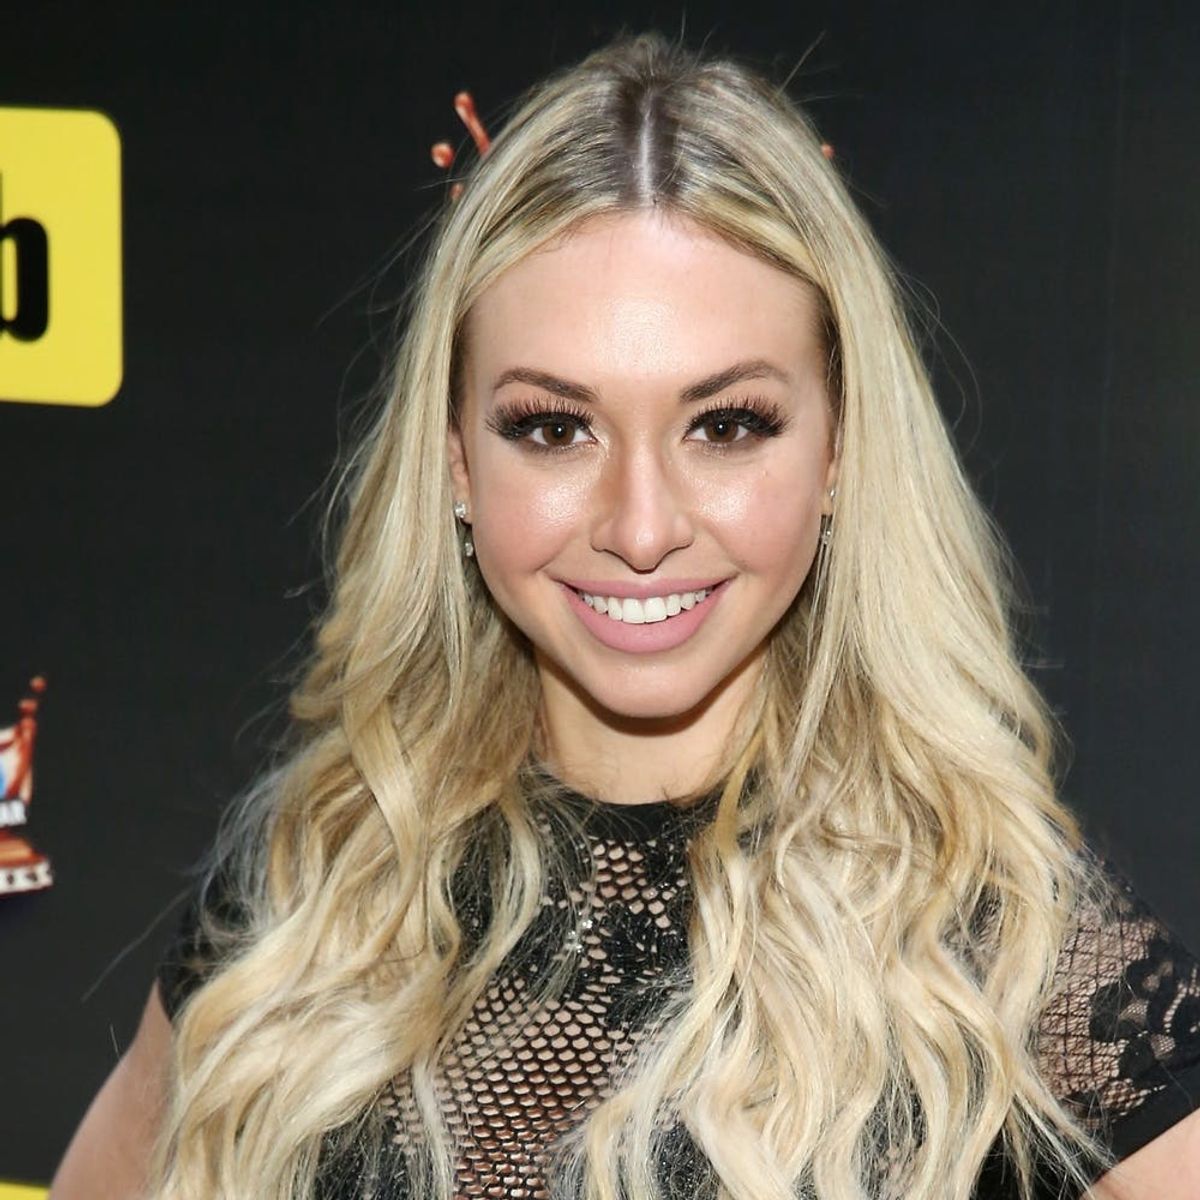 Corinne Olympios Has a New Man and TWO New TV Shows in the Works